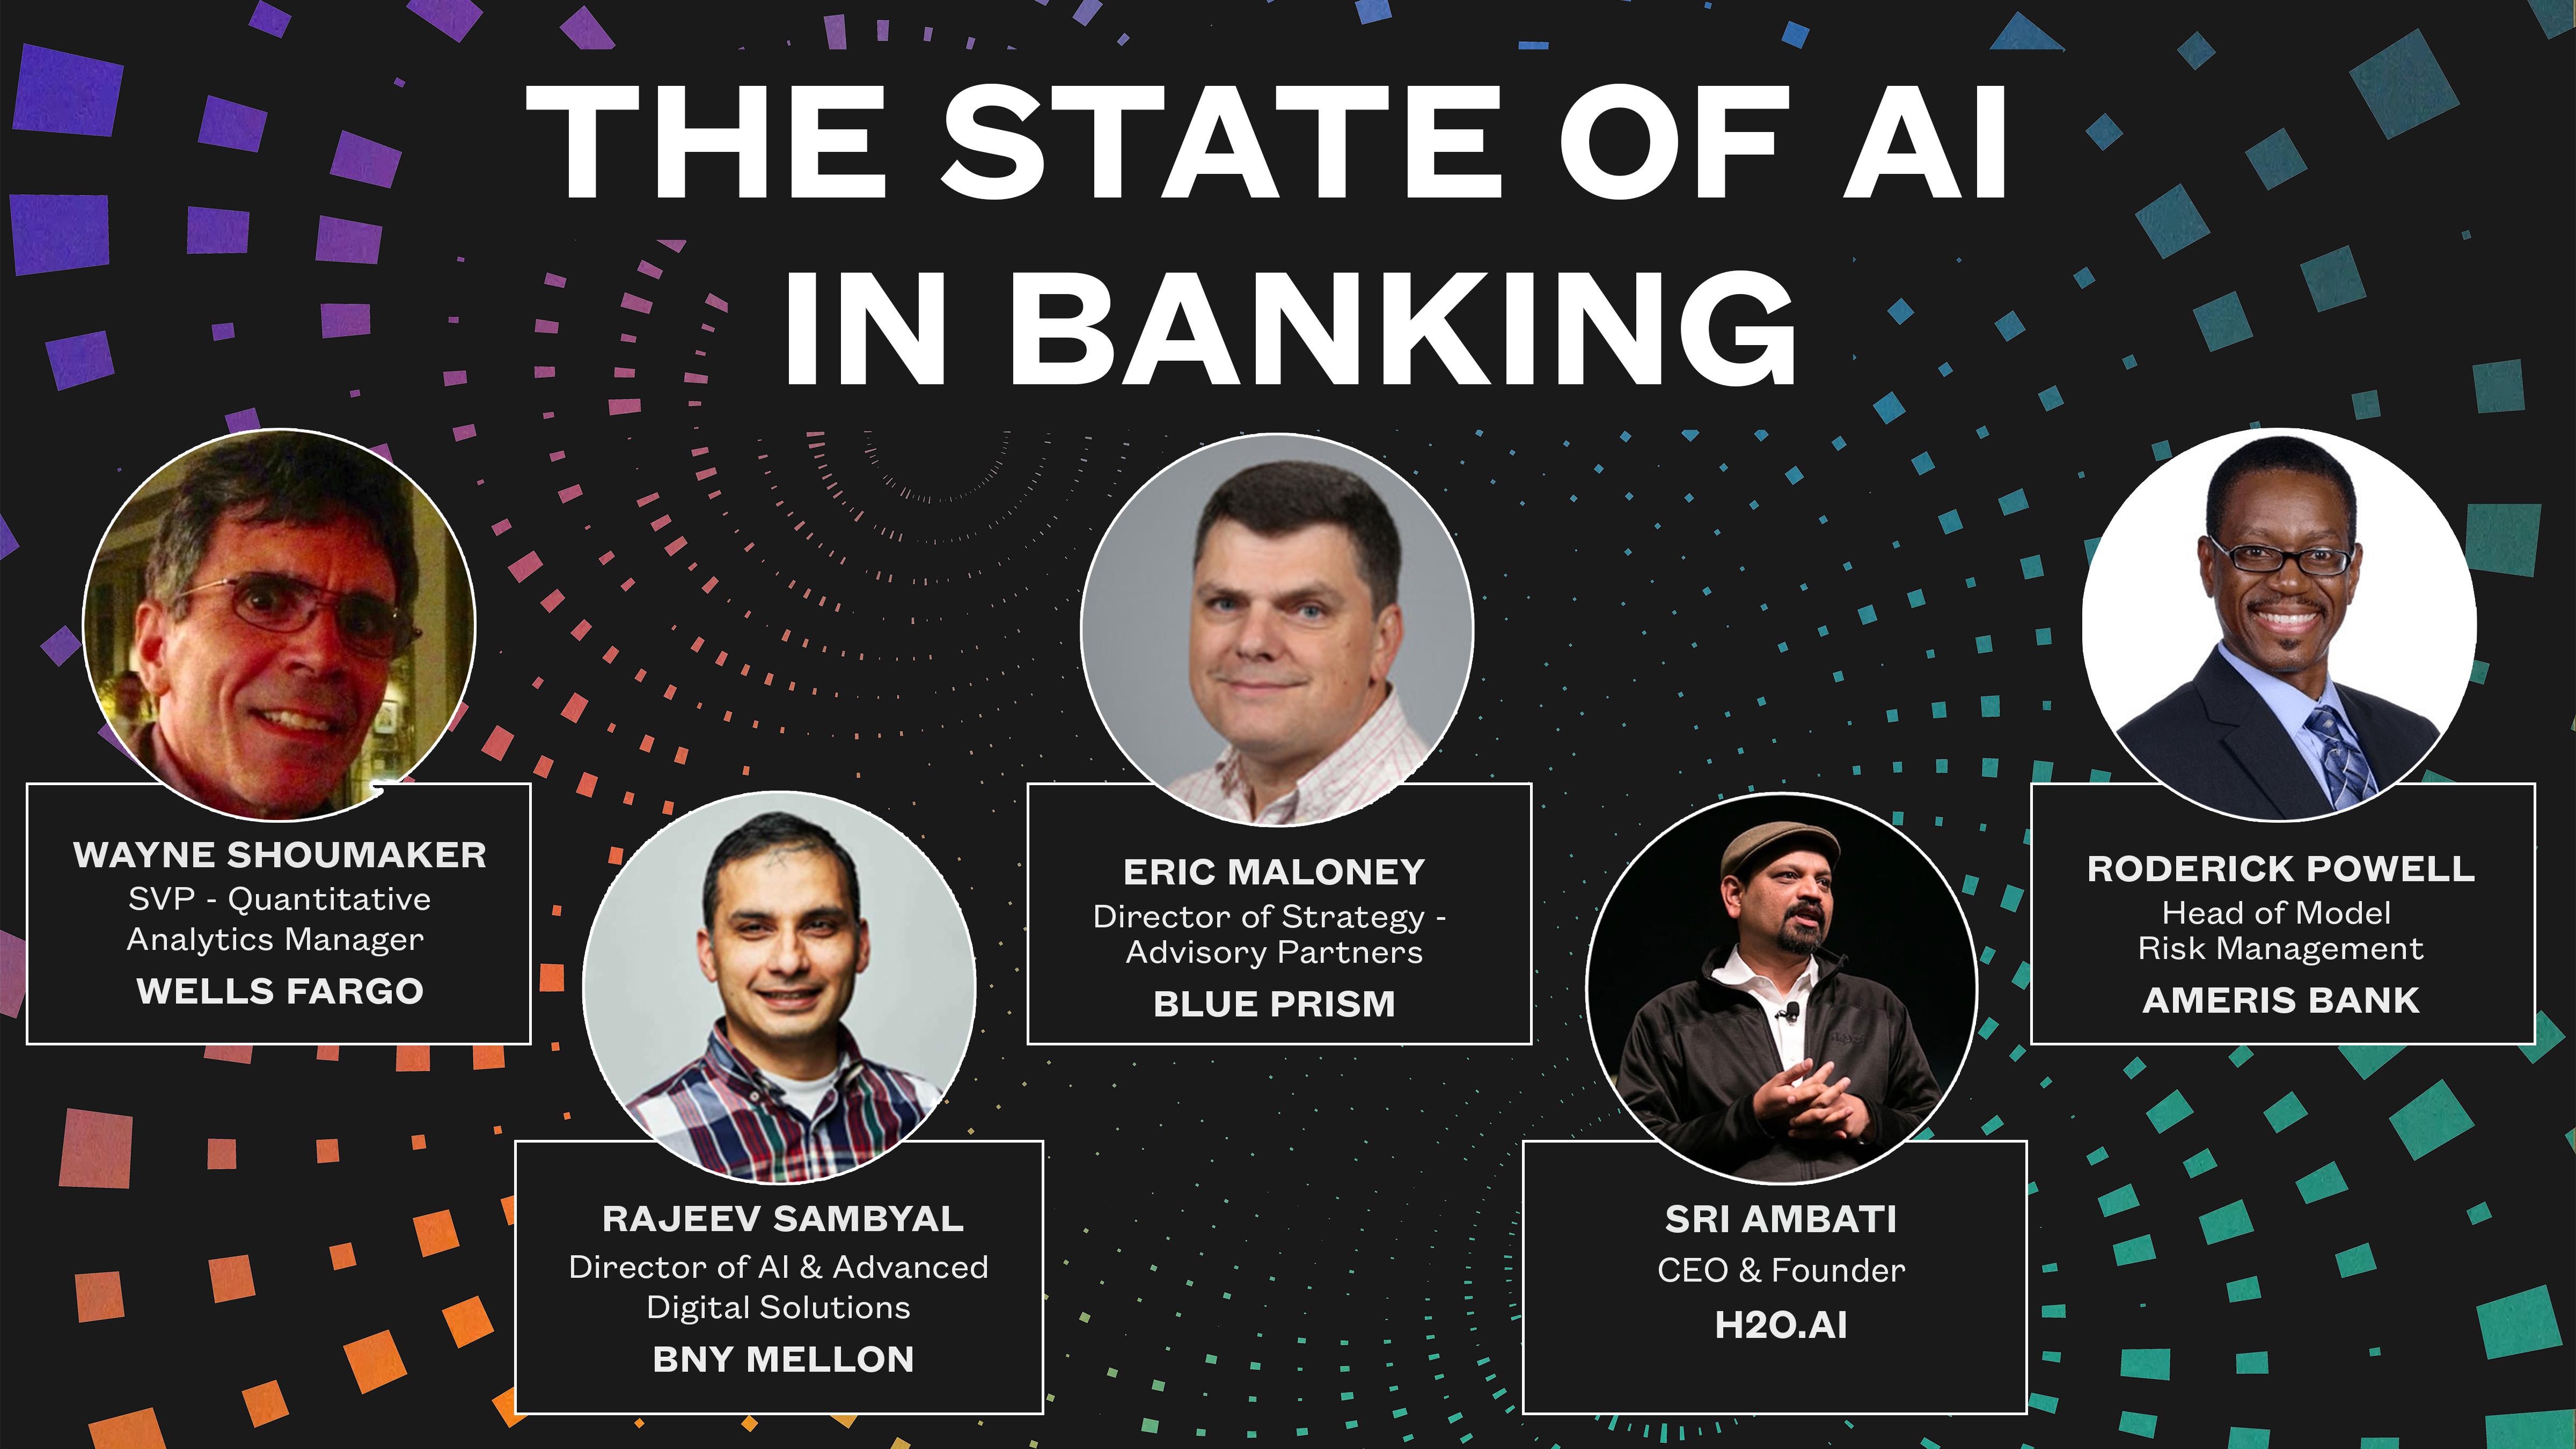 https://ai4.io/blog/2020/04/21/the-state-of-ai-in-banking/